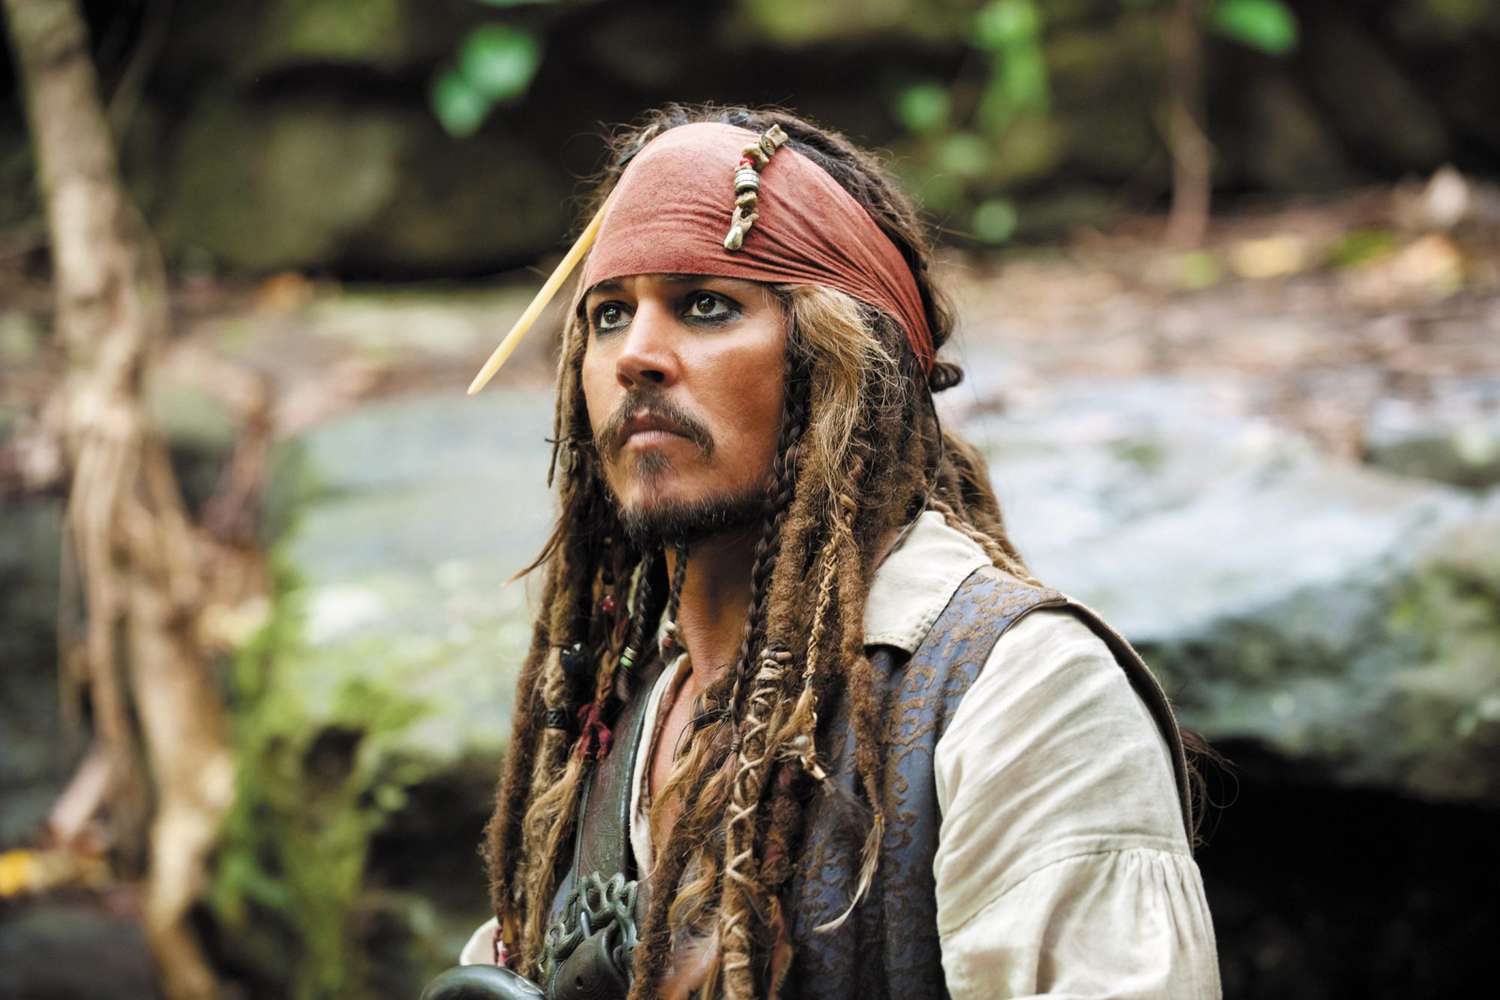 Will Johnny Depp Return To Pirates Of The Caribbean? The Franchise'S Producer Has Some Good News For Us